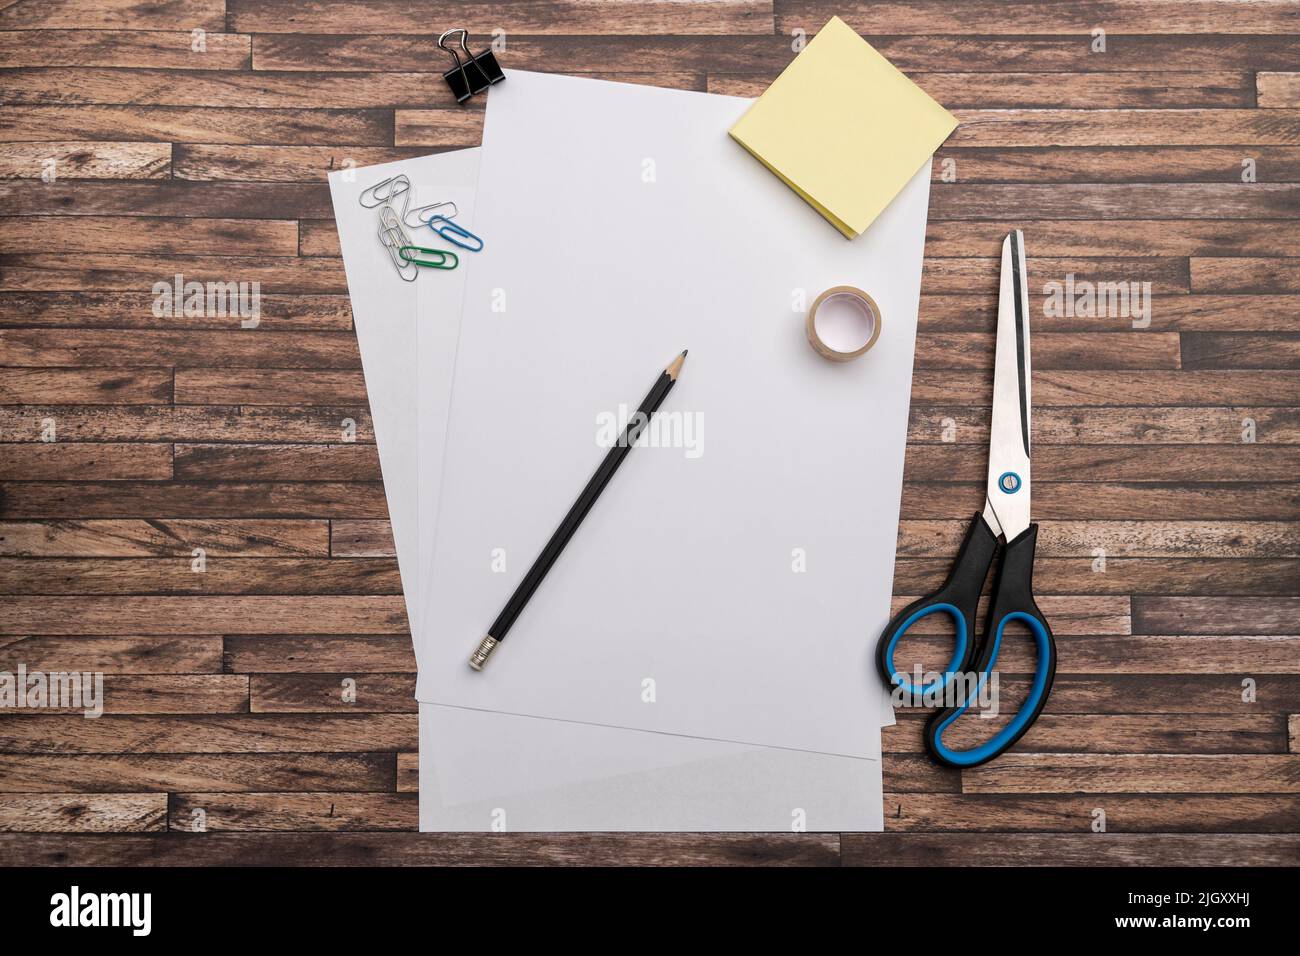 Empty white paper on a desk with office supplies lying down. Top down view from above on a table with a scissors, adhesive tape, a pencil, notes. Stock Photo